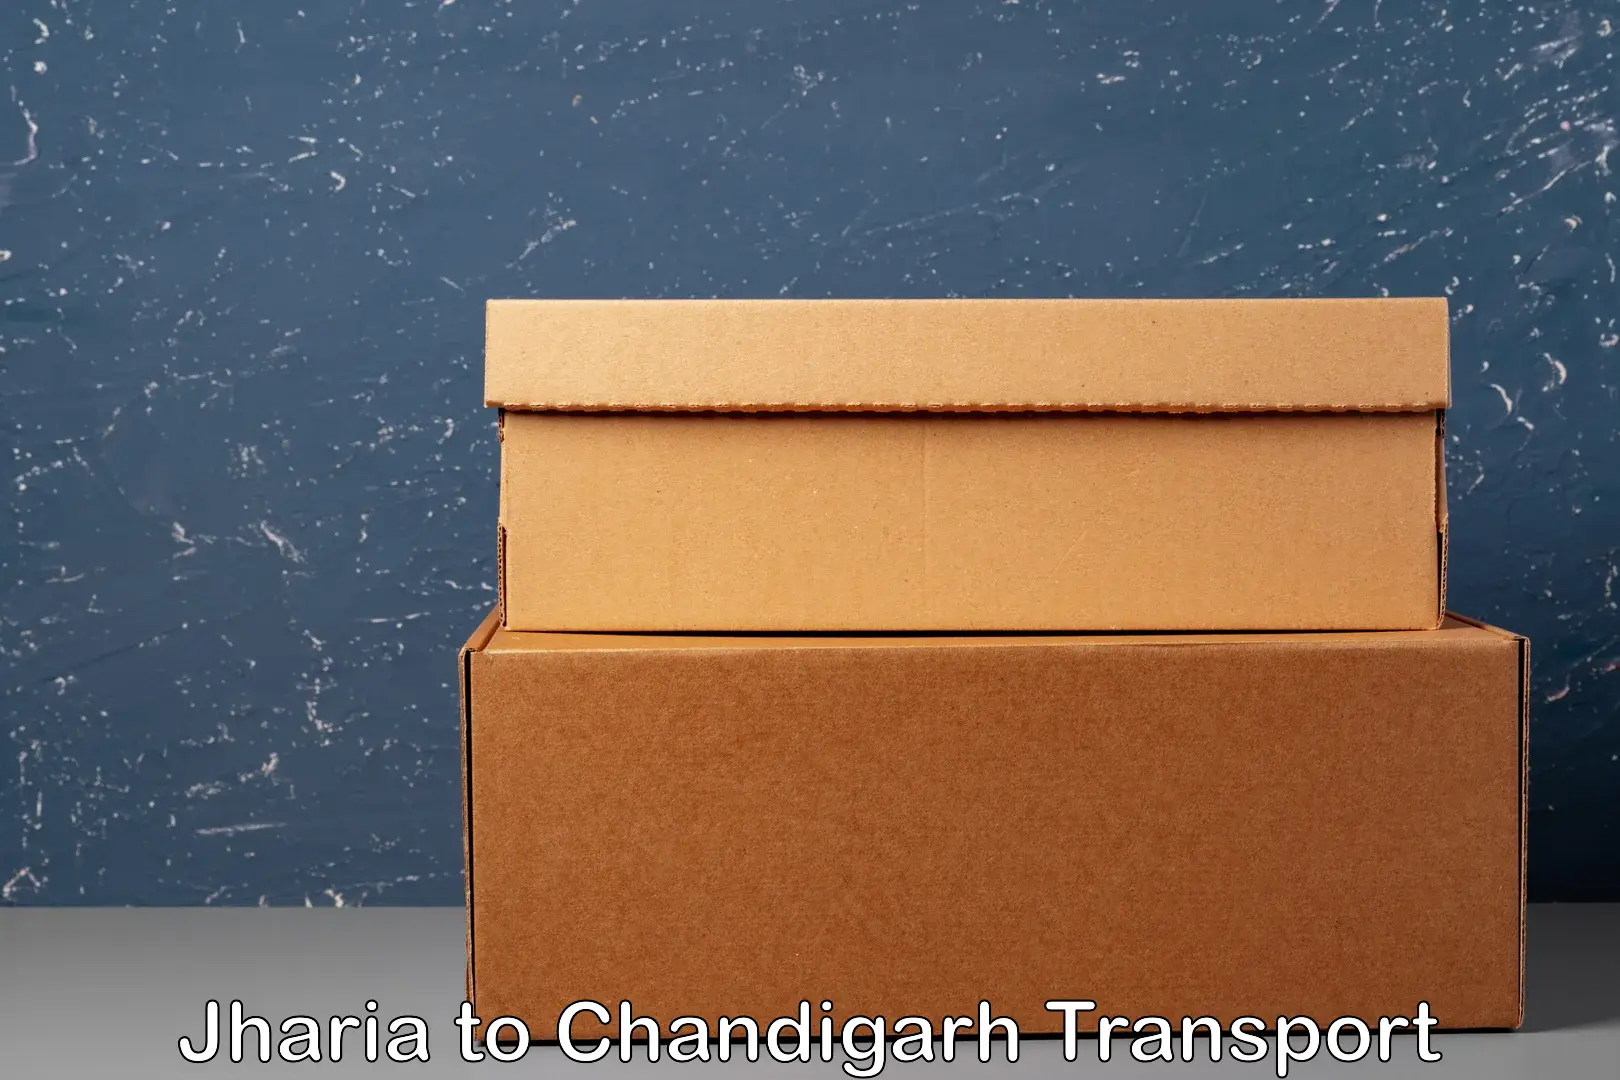 Container transport service Jharia to Chandigarh